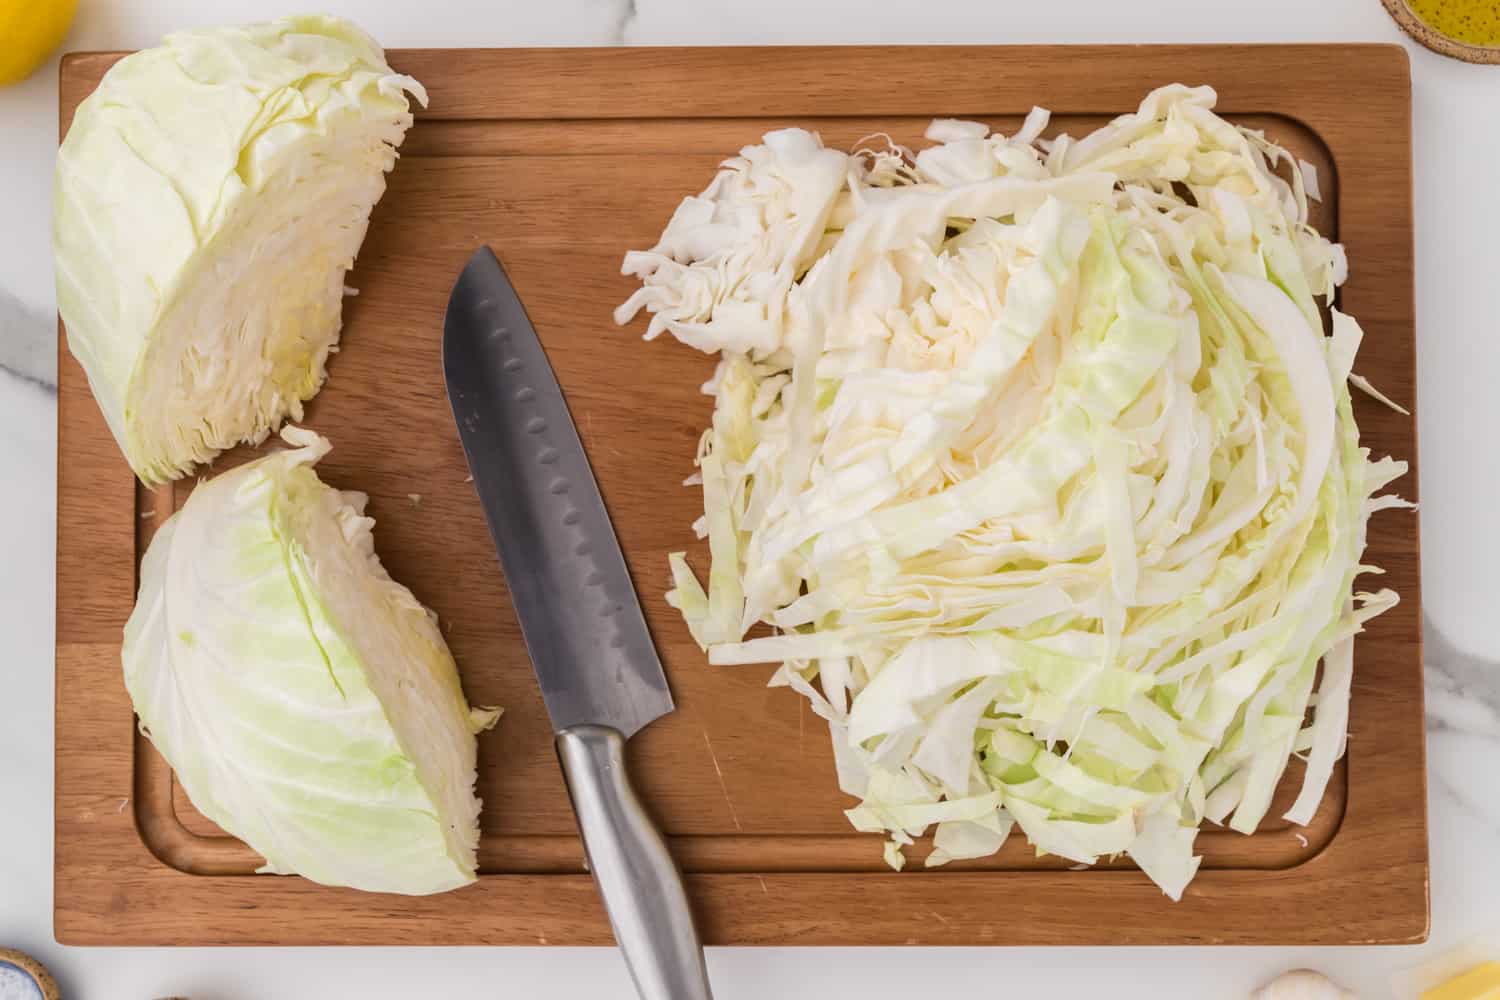 Cabbage being sliced.